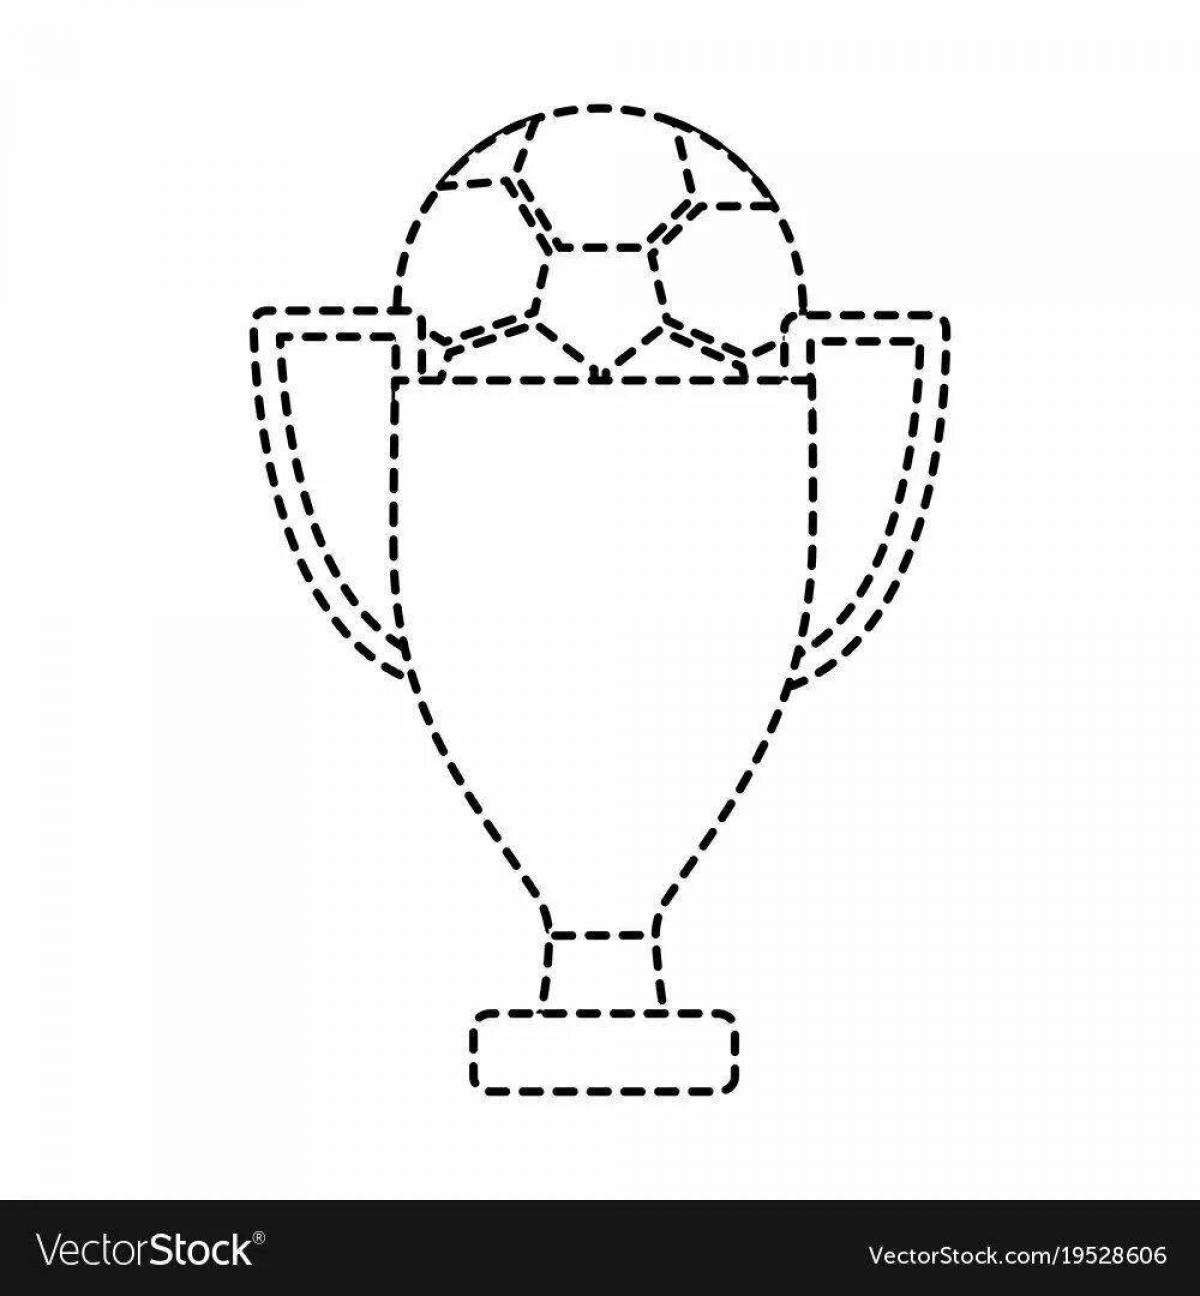 Champions League coloring page with shiny colors